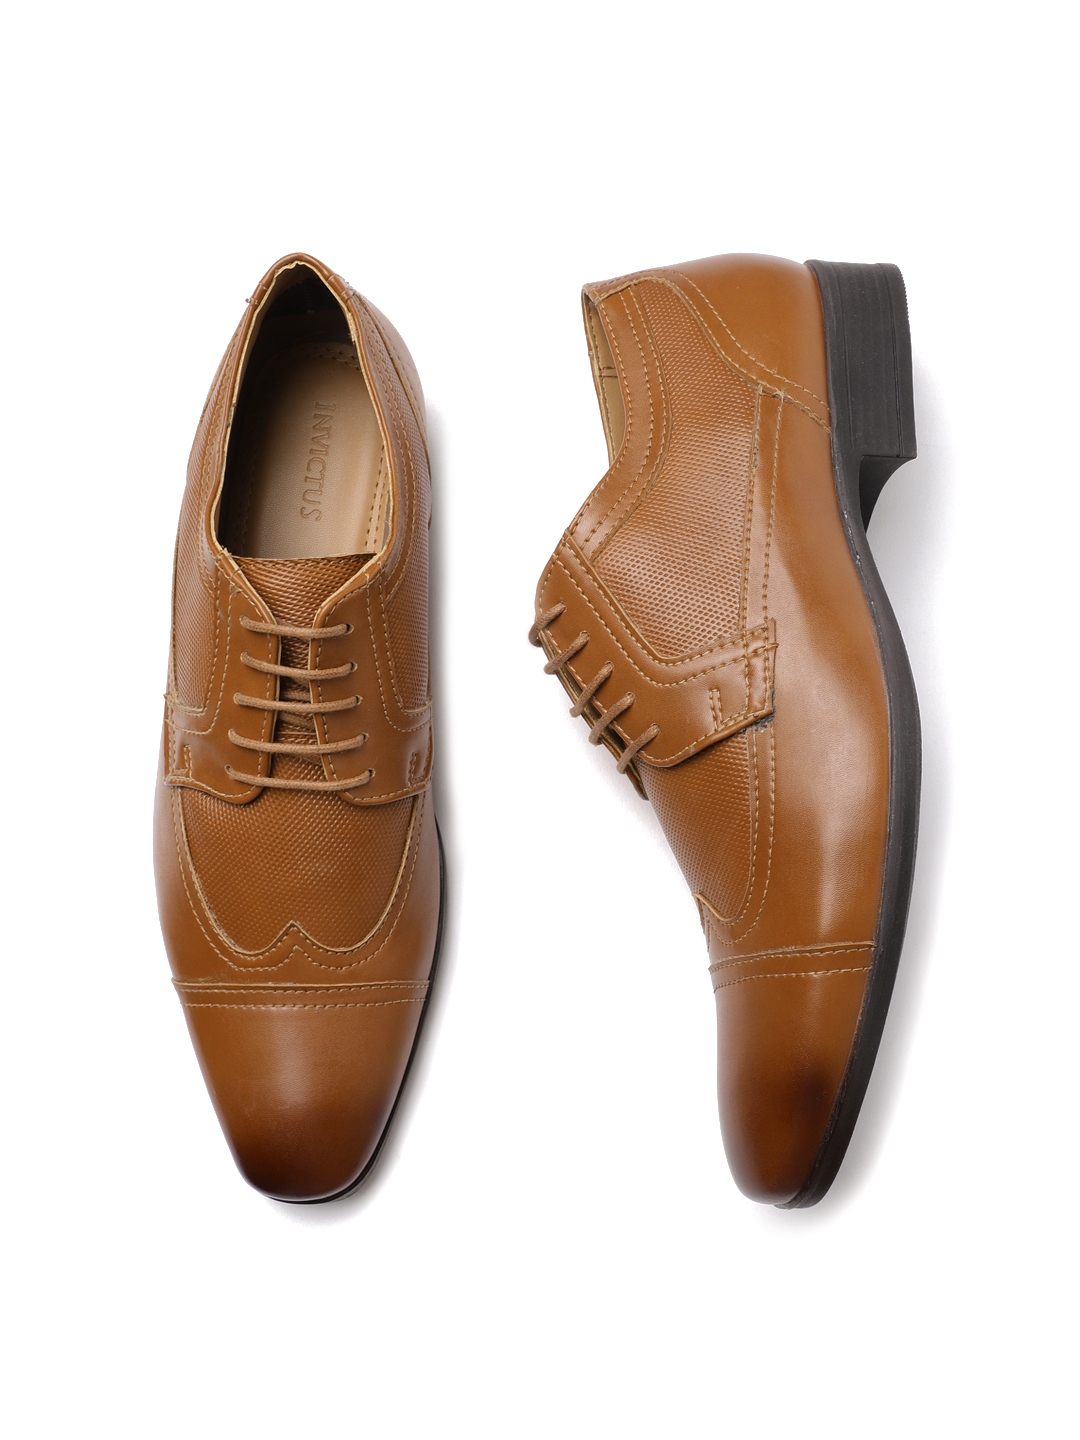 invictus formal shoes